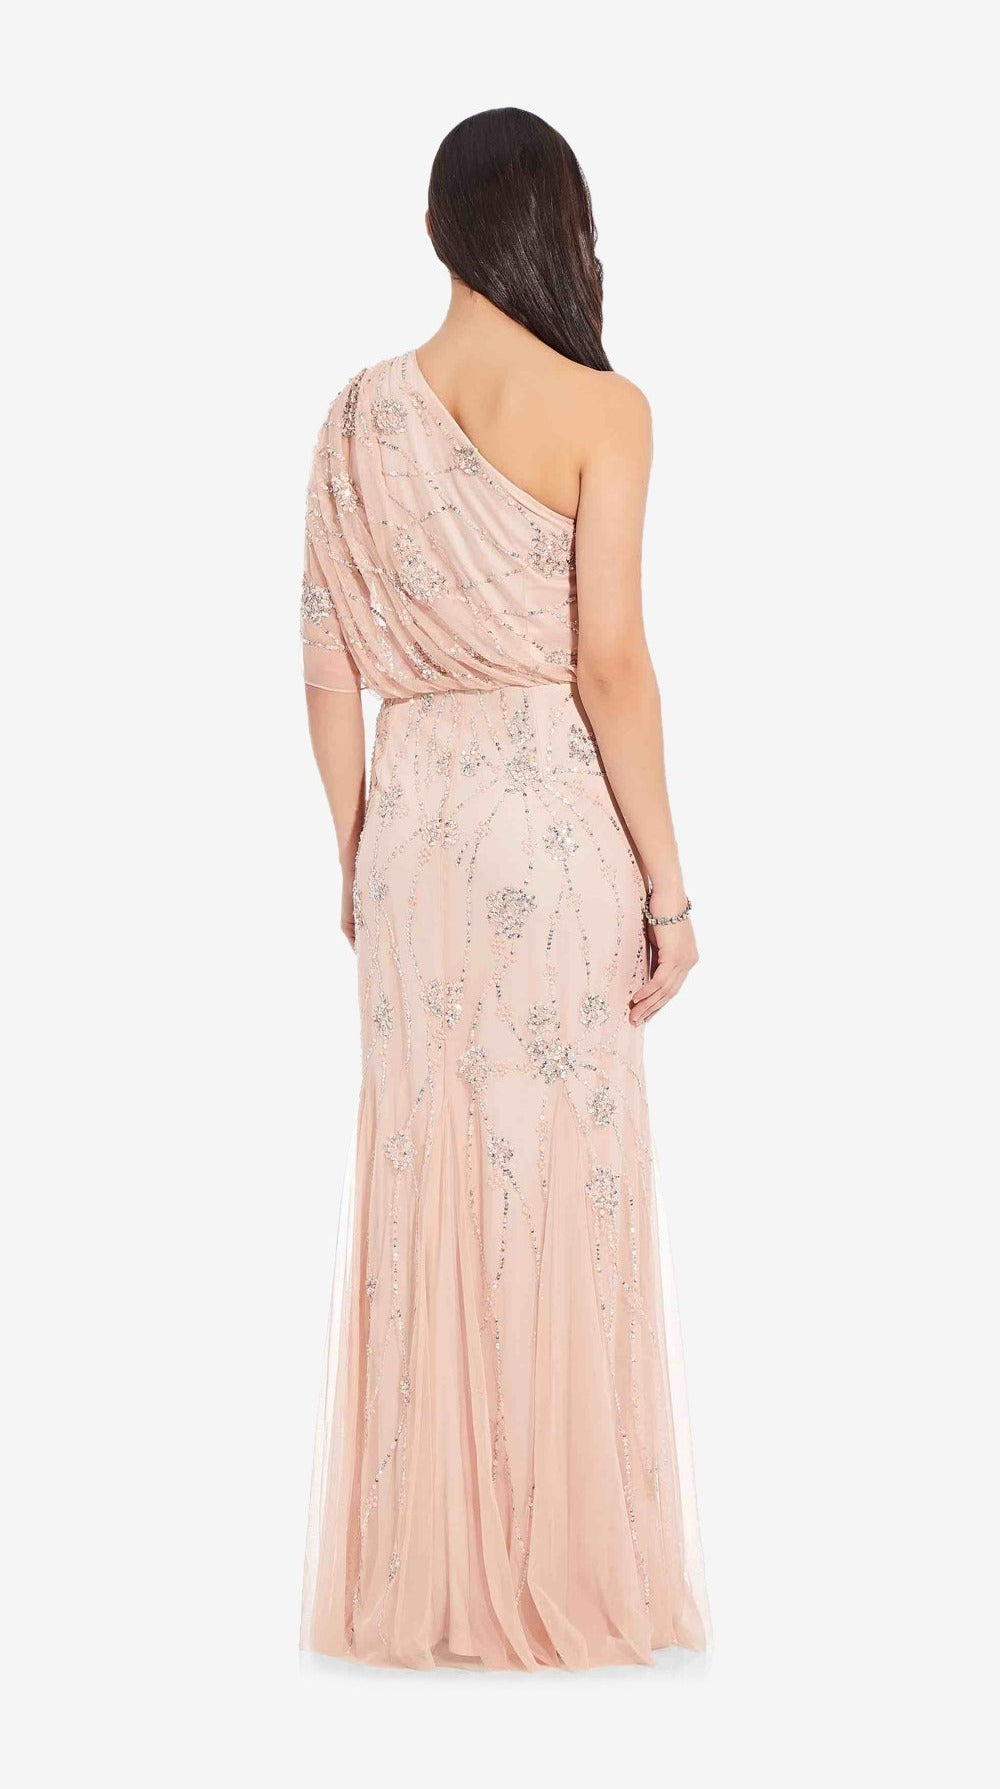 Adrianna Papell Shoulder Beaded Gown - Blush - Adinas Bridal